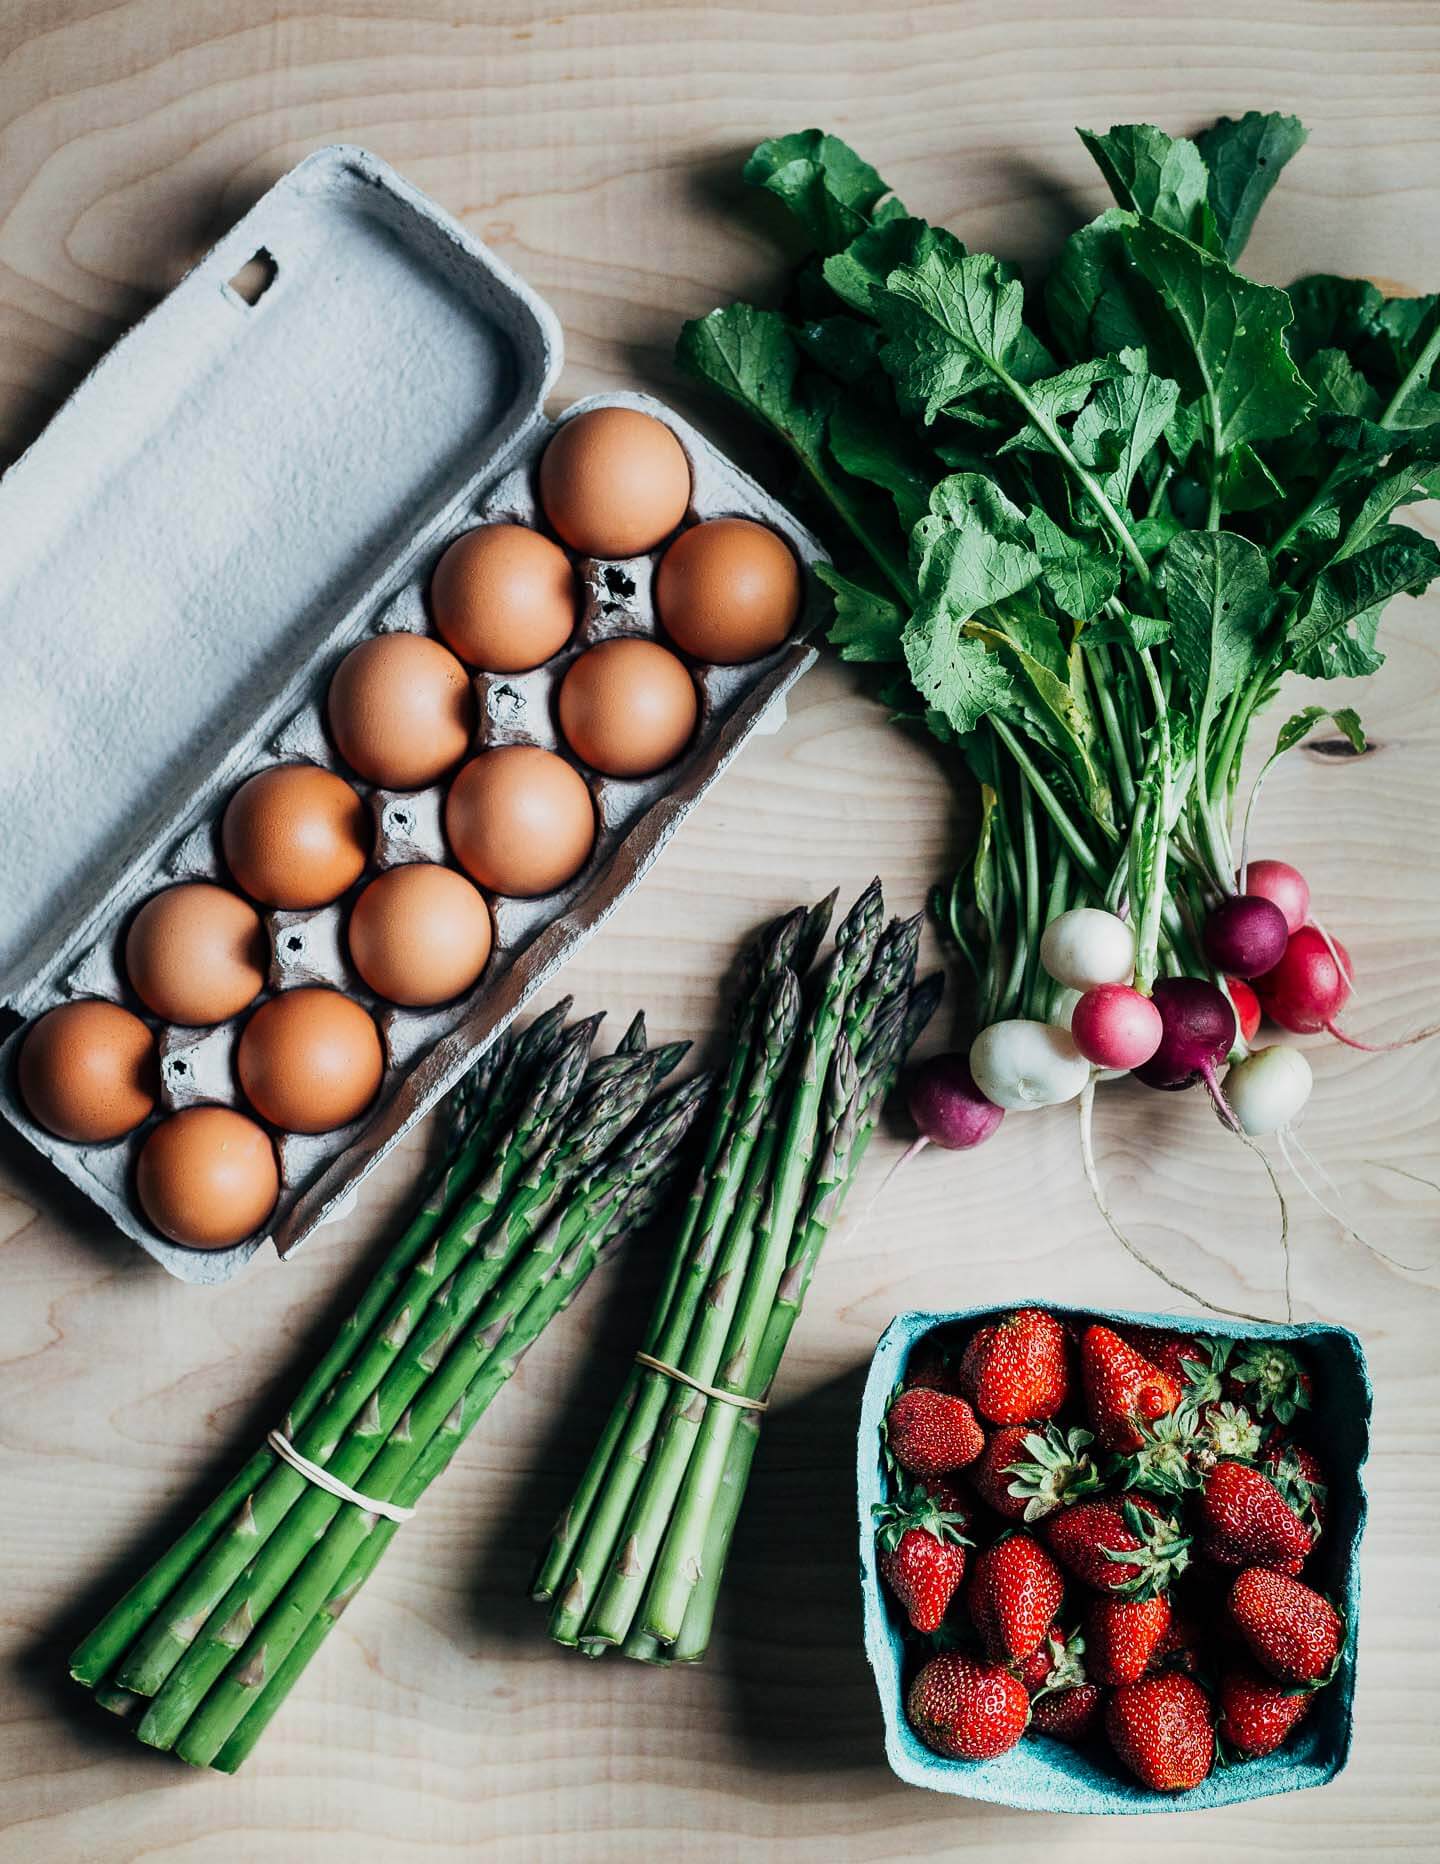 Spring produce guide, featuring eggs, radishes, two bunches asparagus, and strawberries